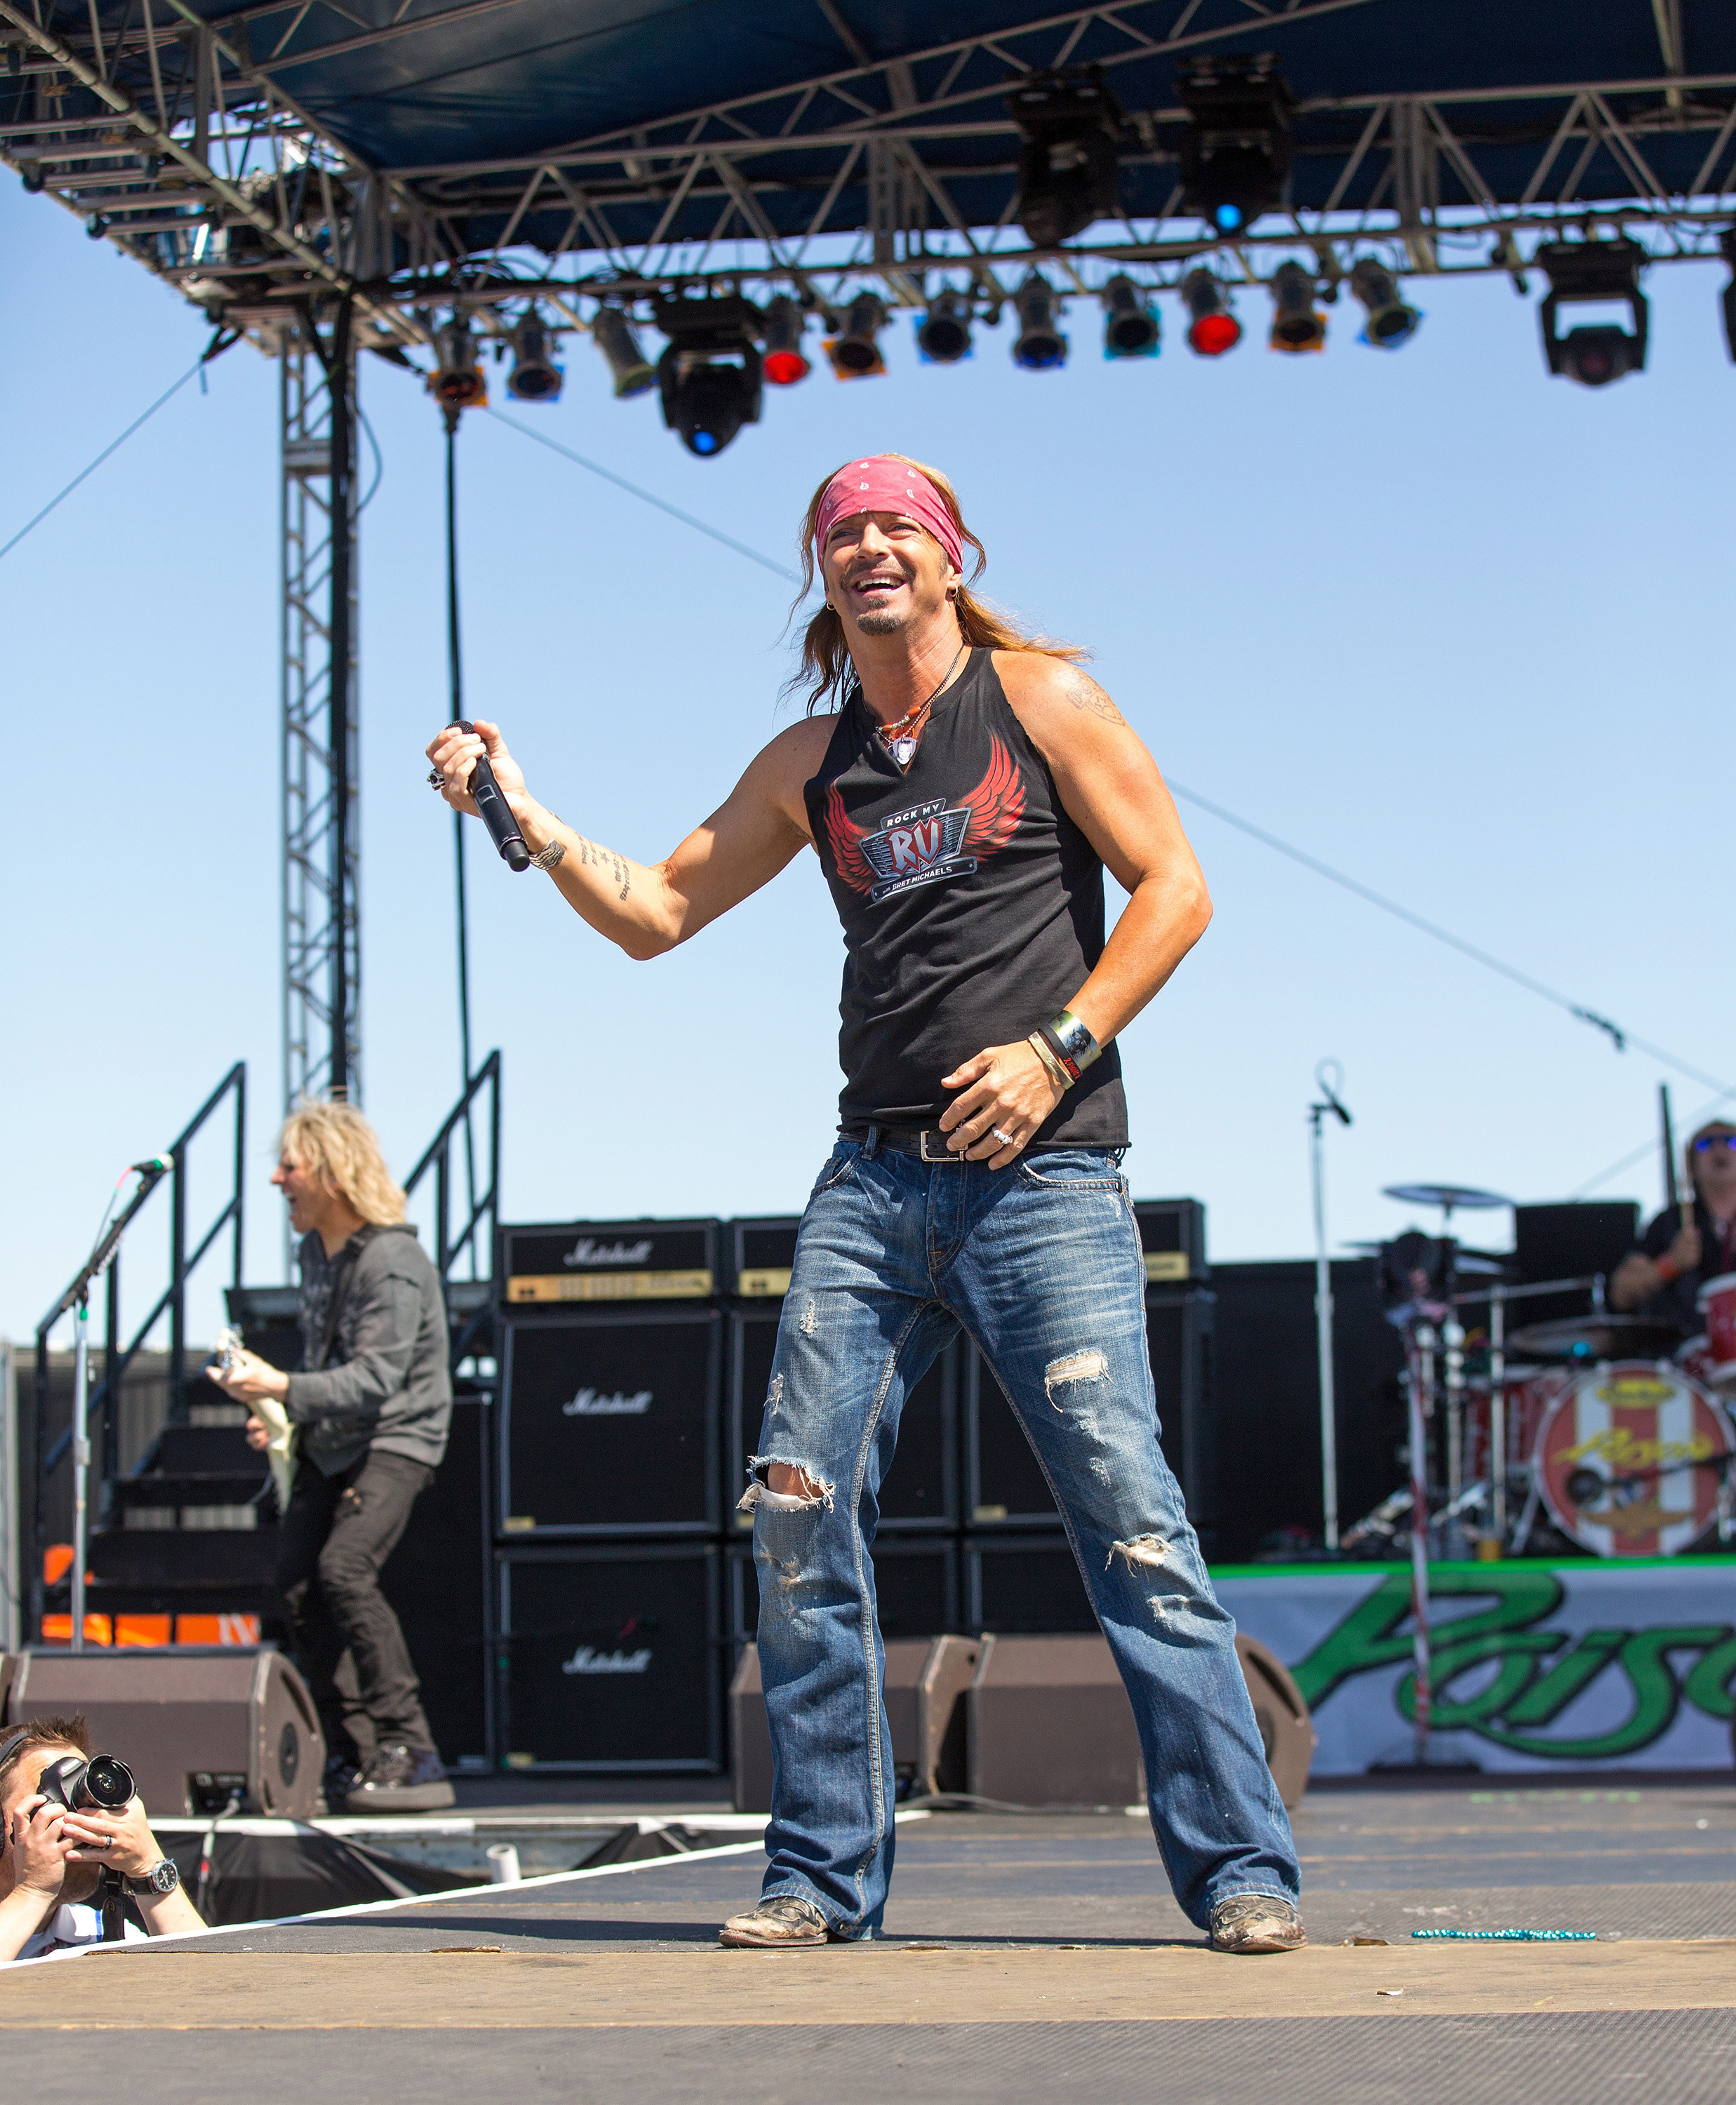 Bret Michaels of Poison performs onstage during the 2013 Indy 500 Miller Lite Carb Day concert on May 24, 2013